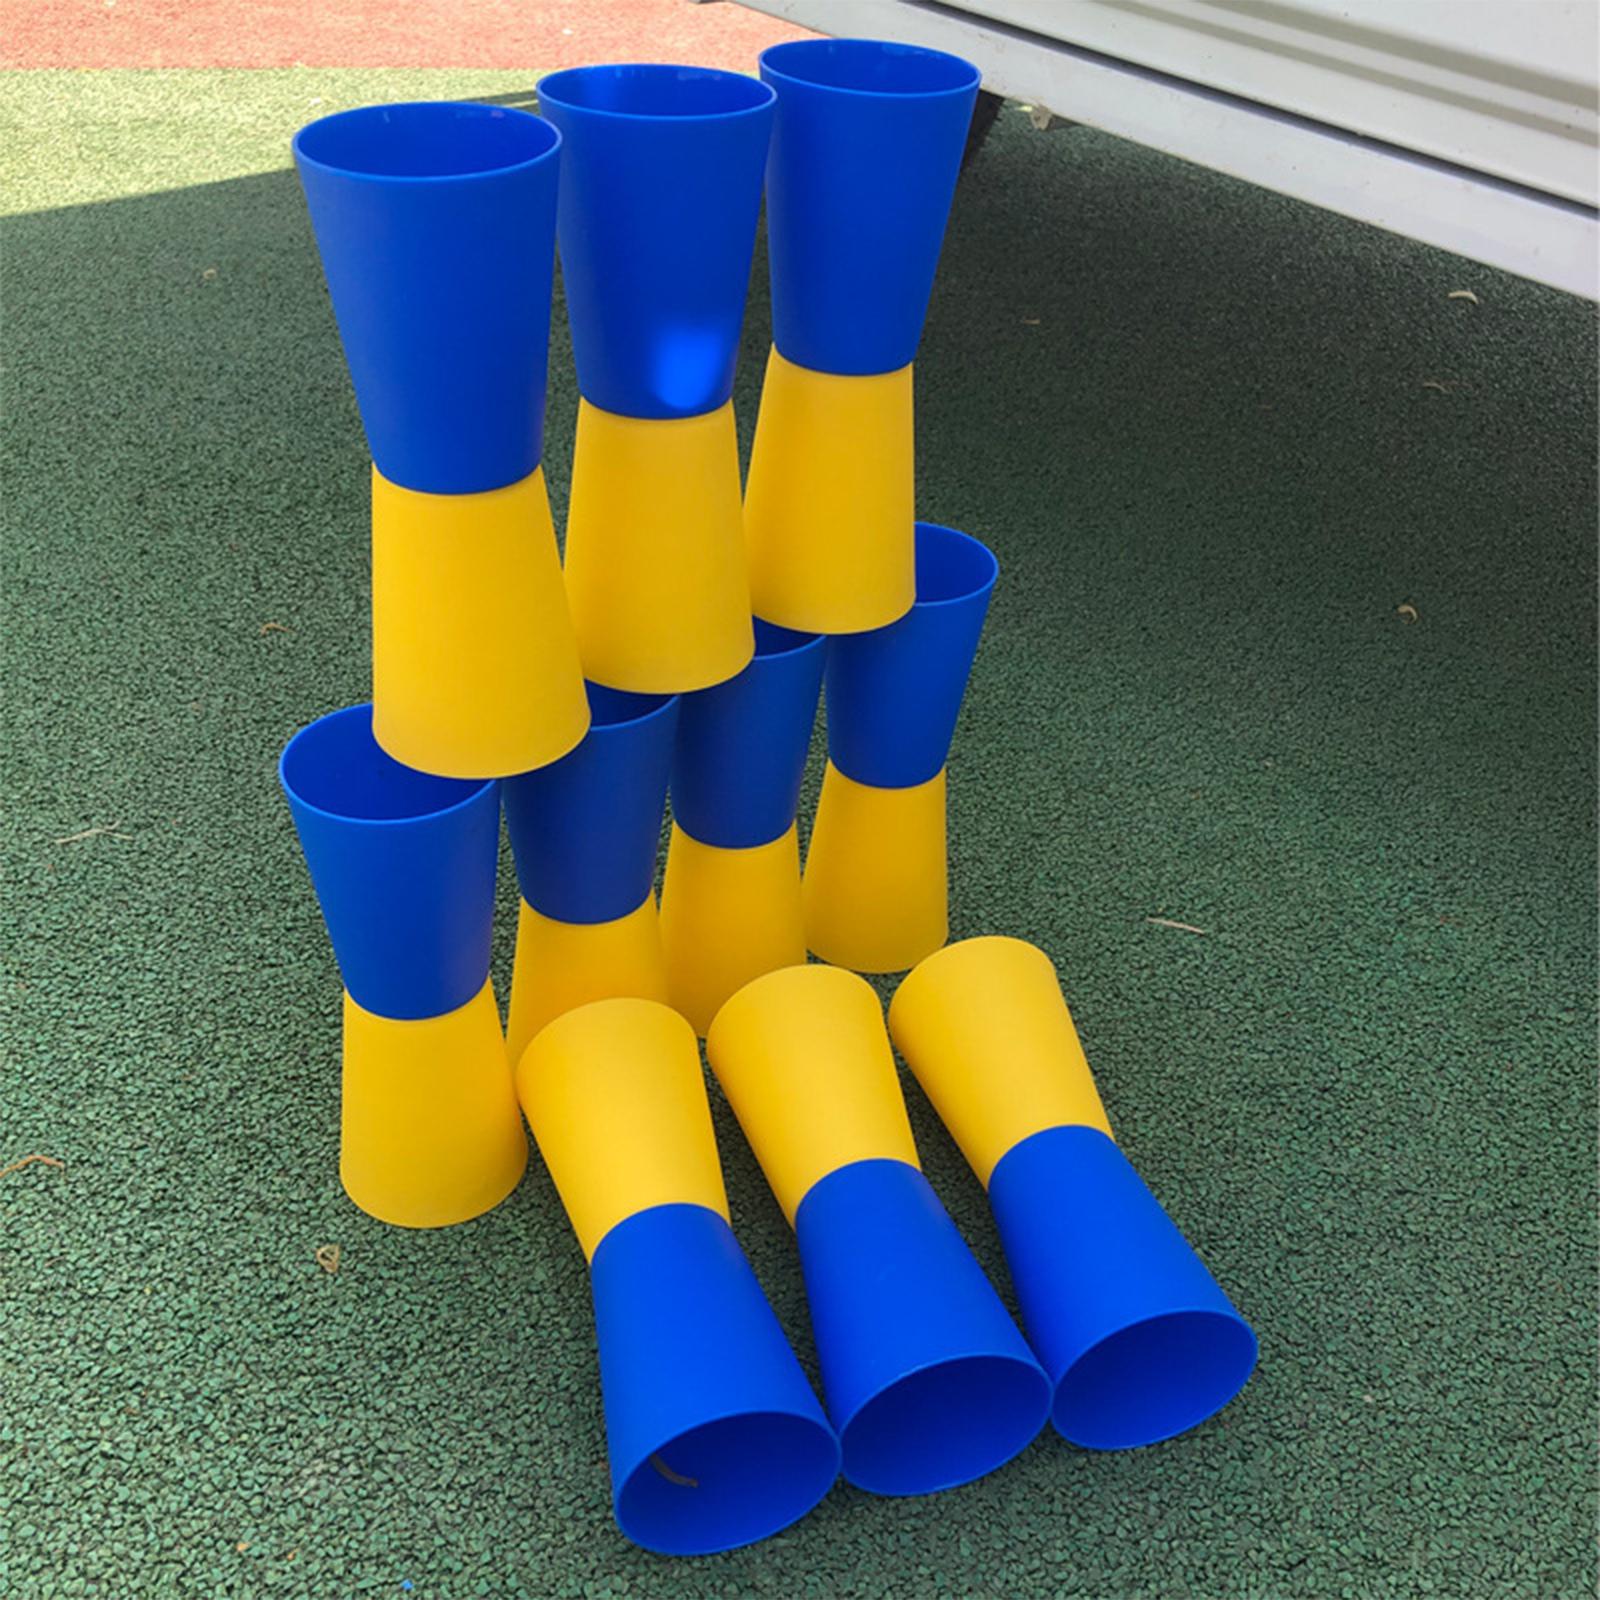 10Pcs Flip Cups Agility Training Running for Basketball Indoor Blue Yellow